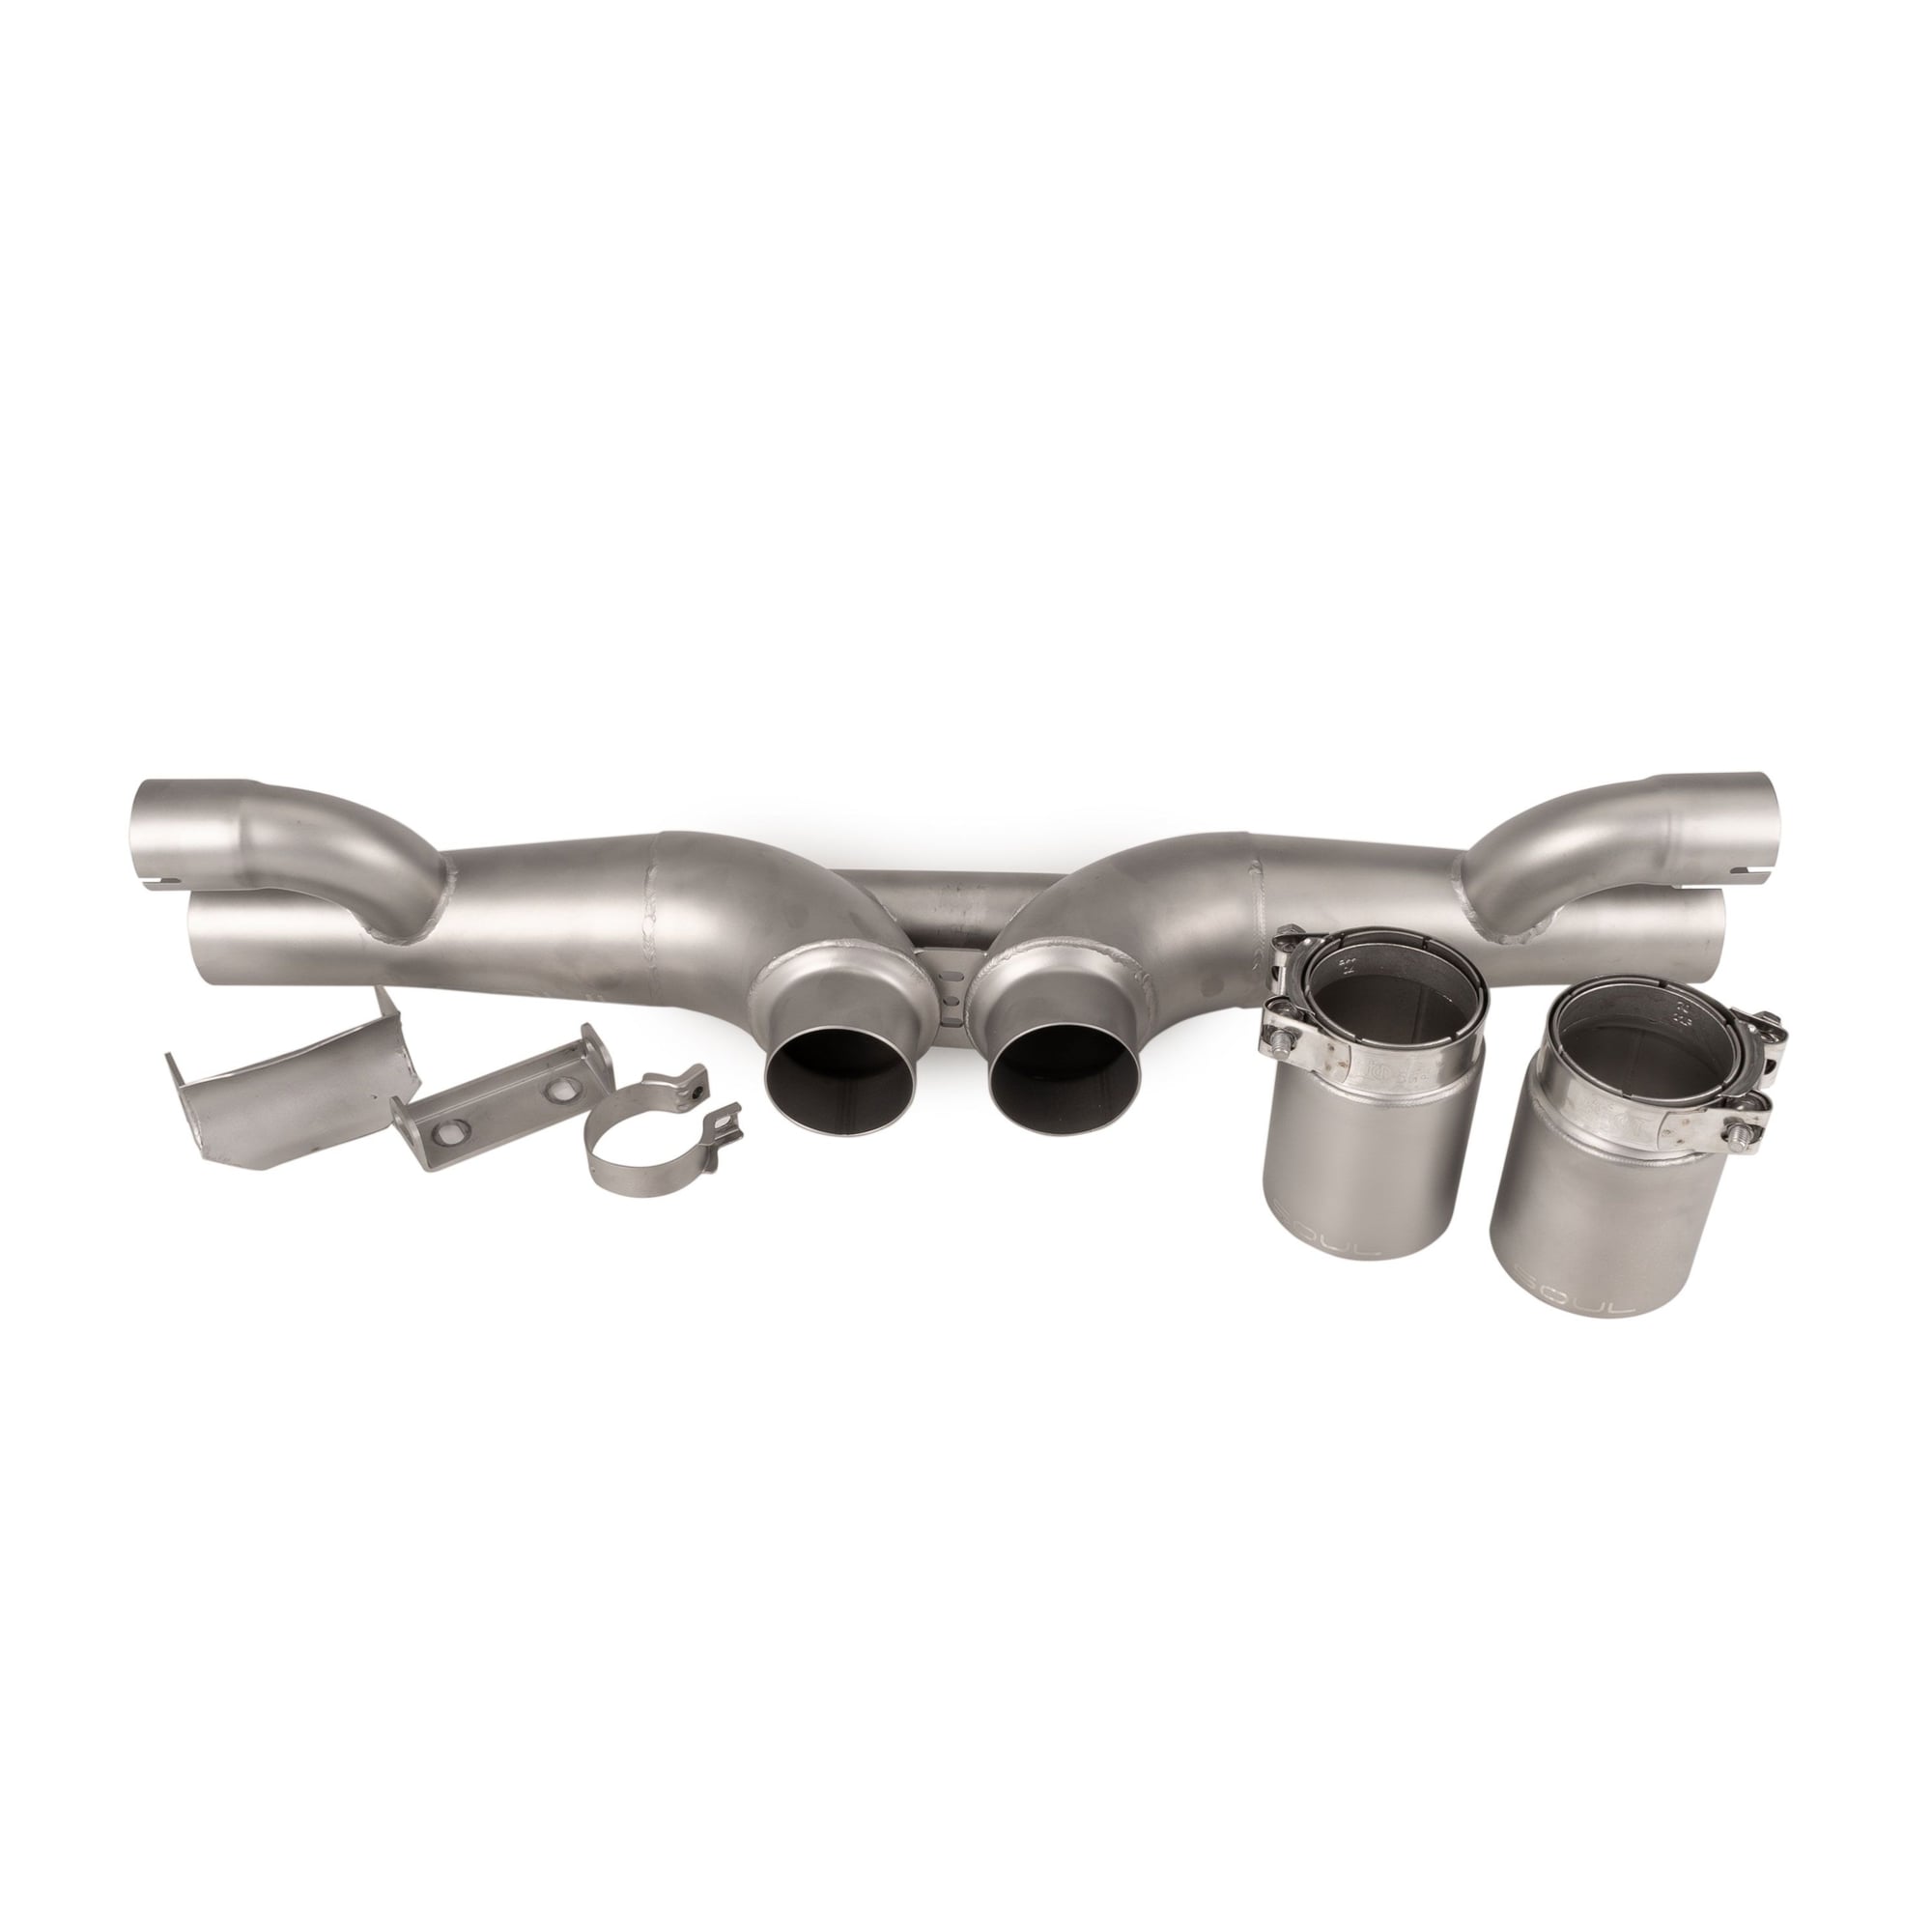 Engine - Electrical - Soul Muffler Bypass for 997 GT3/GT3RS - New - 2007 to 2011 Porsche 911 - Orlando, FL 32824, United States